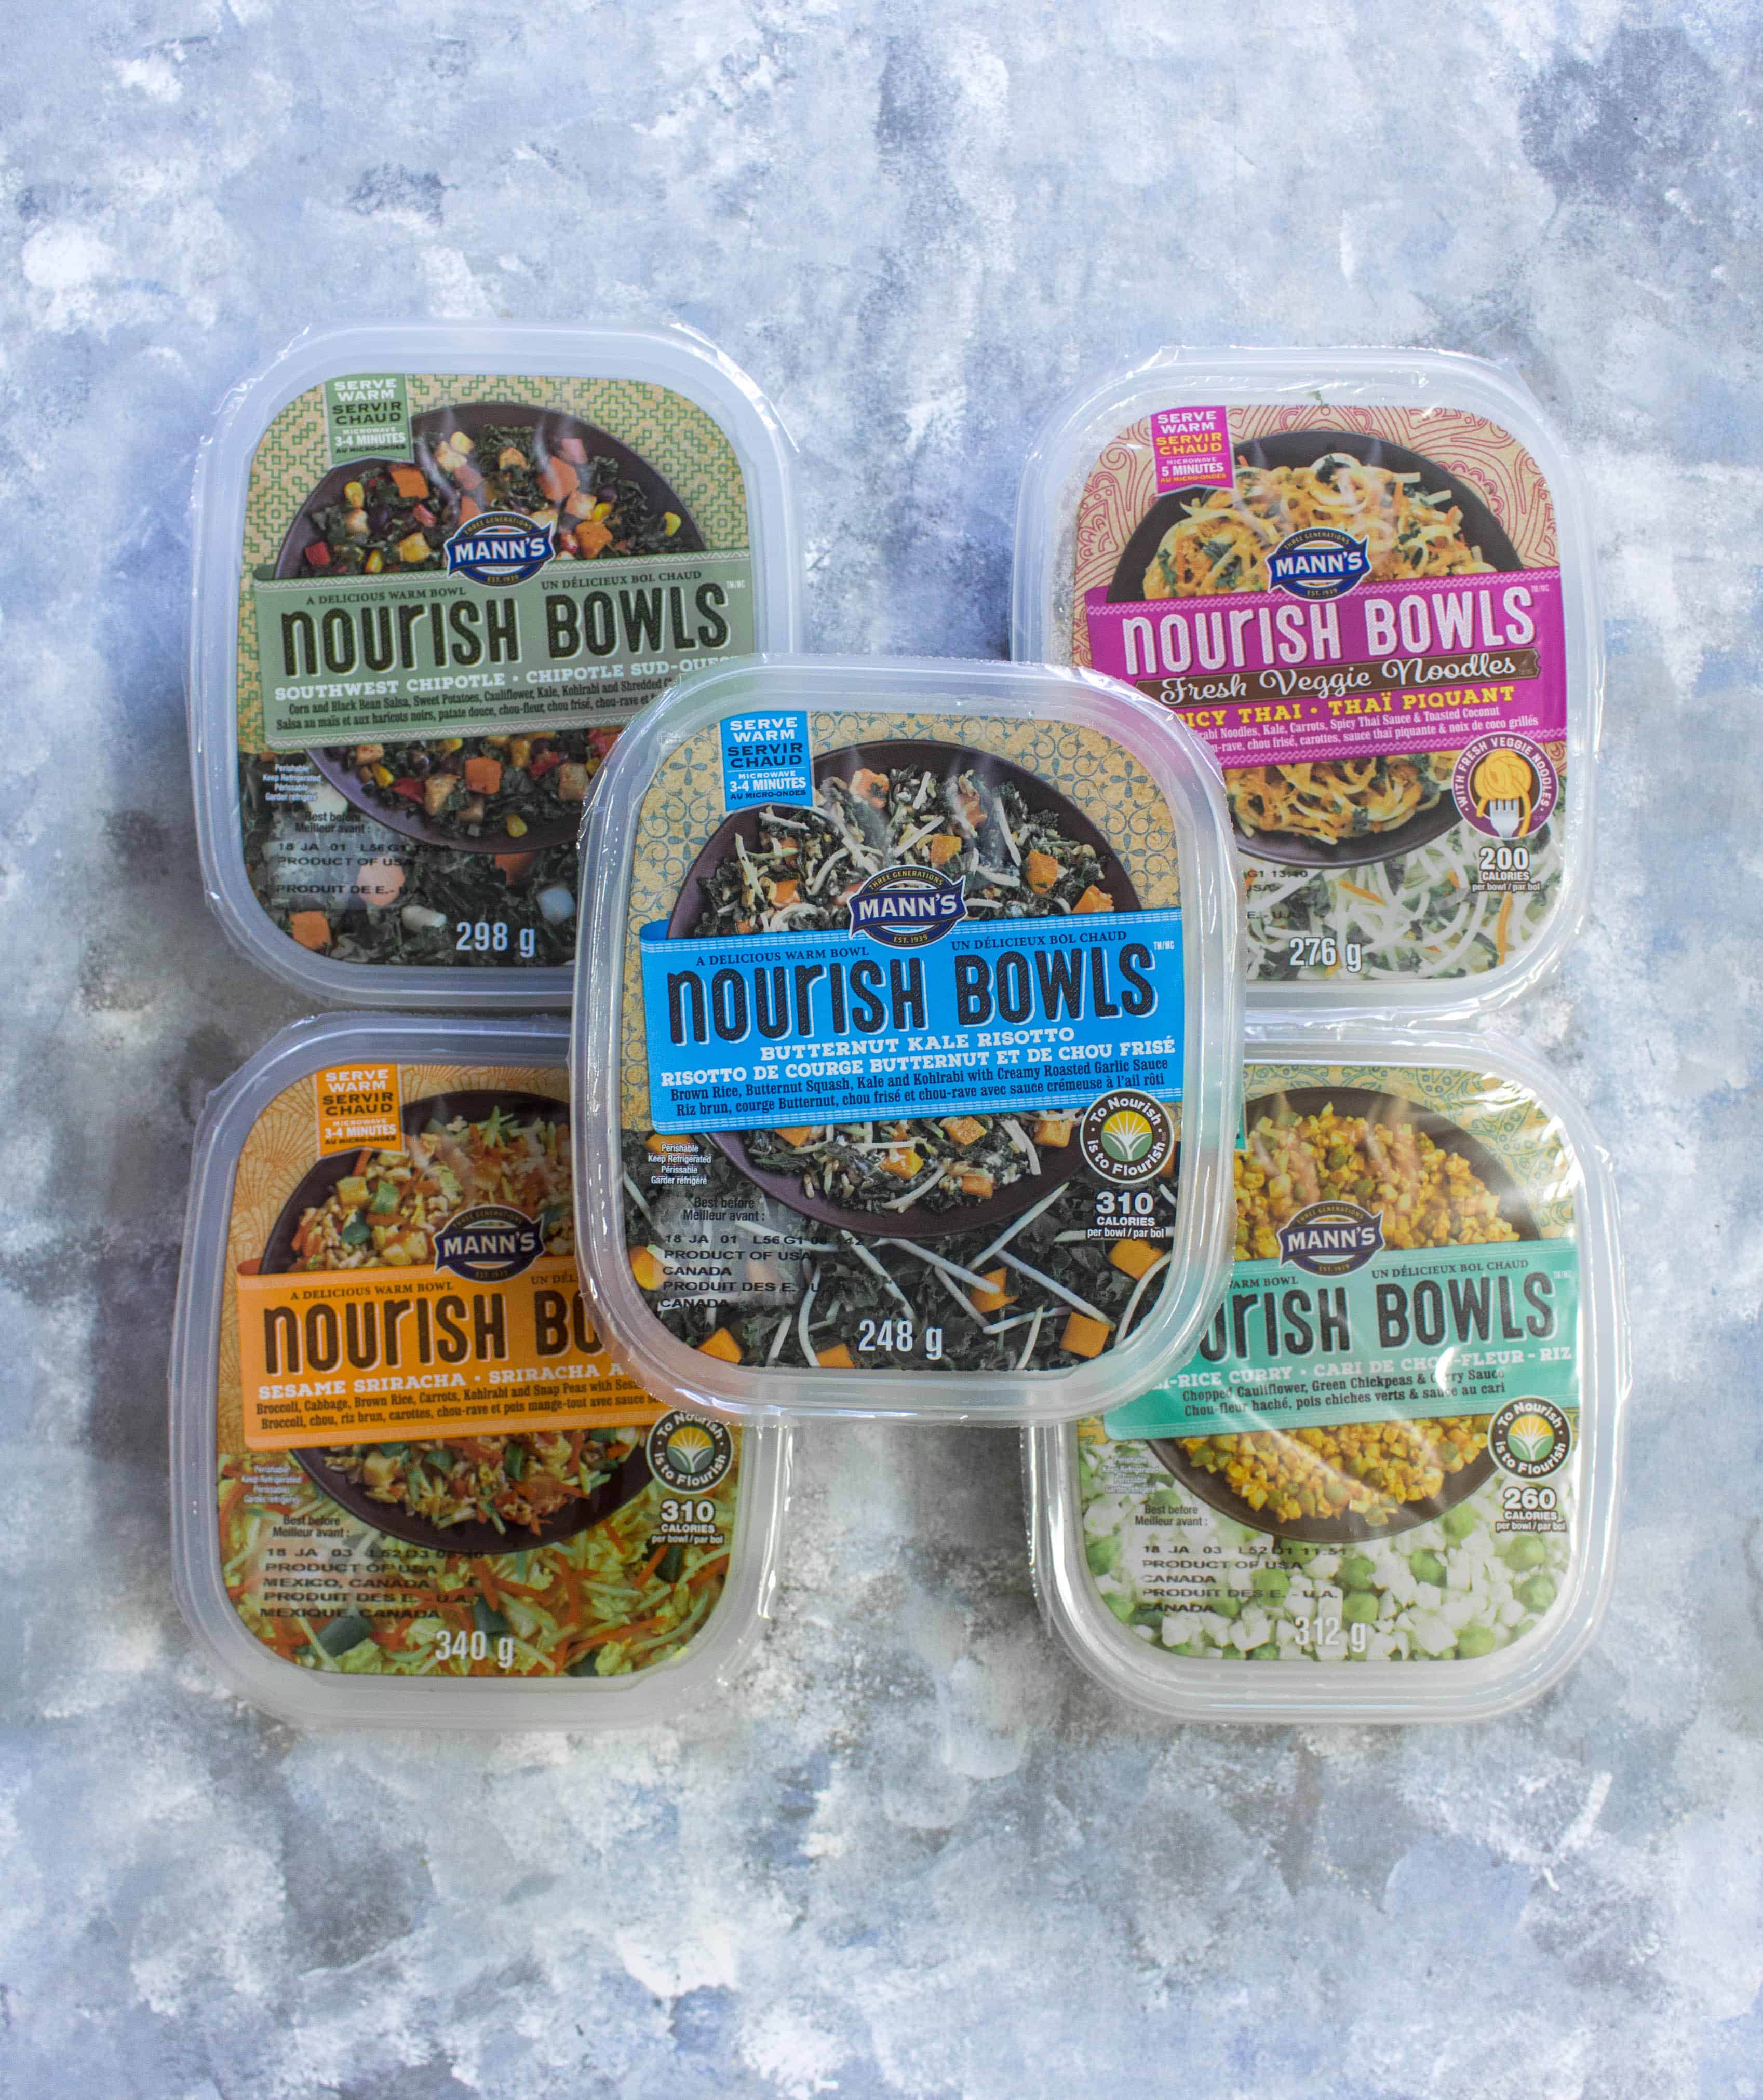 Nourish bowls - easy way to be healthier in the new year